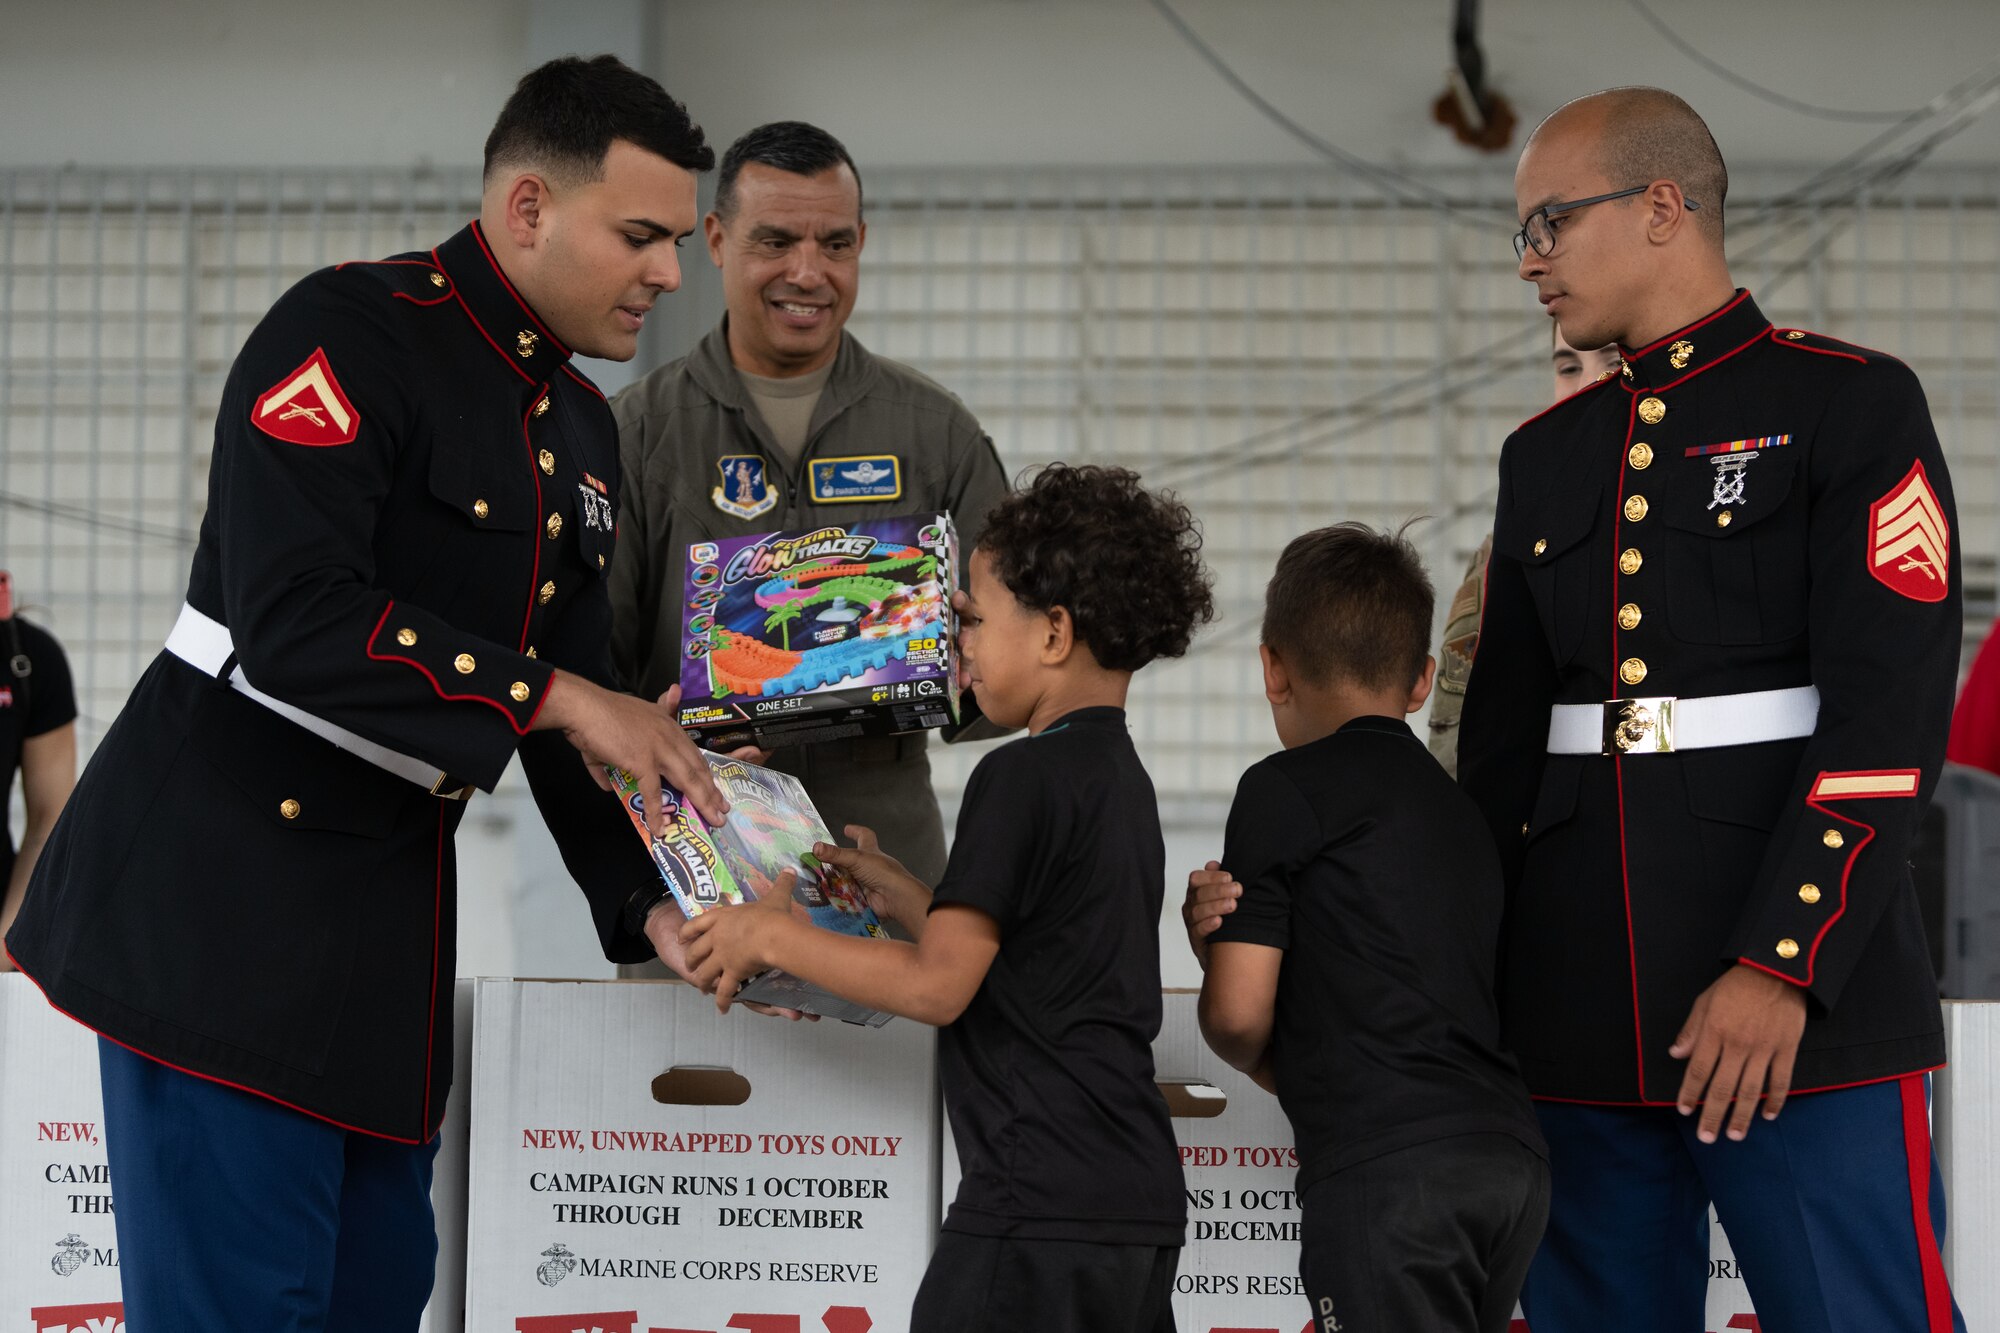 U.S. Air Force Col. Evaristo Orengo III., the 156th Wing commander, Puerto Rico Air National Guard, U.S. Marine Lance Cpl. Jose Gonzalez Gomez, a Toys for Tots assistant coordinator, and Sgt. Yadiel Burgos Benitez, a Toys for Tots coordinator, both assigned to Det. 1 Landing Support Company, Combat Logistics Regiment 45, 4th Marine Logistics Group, distribute toys at Dr. Julio Henna Elementary School, San Juan, Puerto Rico, Dec. 14, 2023. The event was part of the campaign with Toys for Tots, where PRANG members partnered with Marines to distribute more than 200 toys to children at a local school. (U.S. Air National Guard photo by Airman 1st Gisselle Toro-Caraballo)